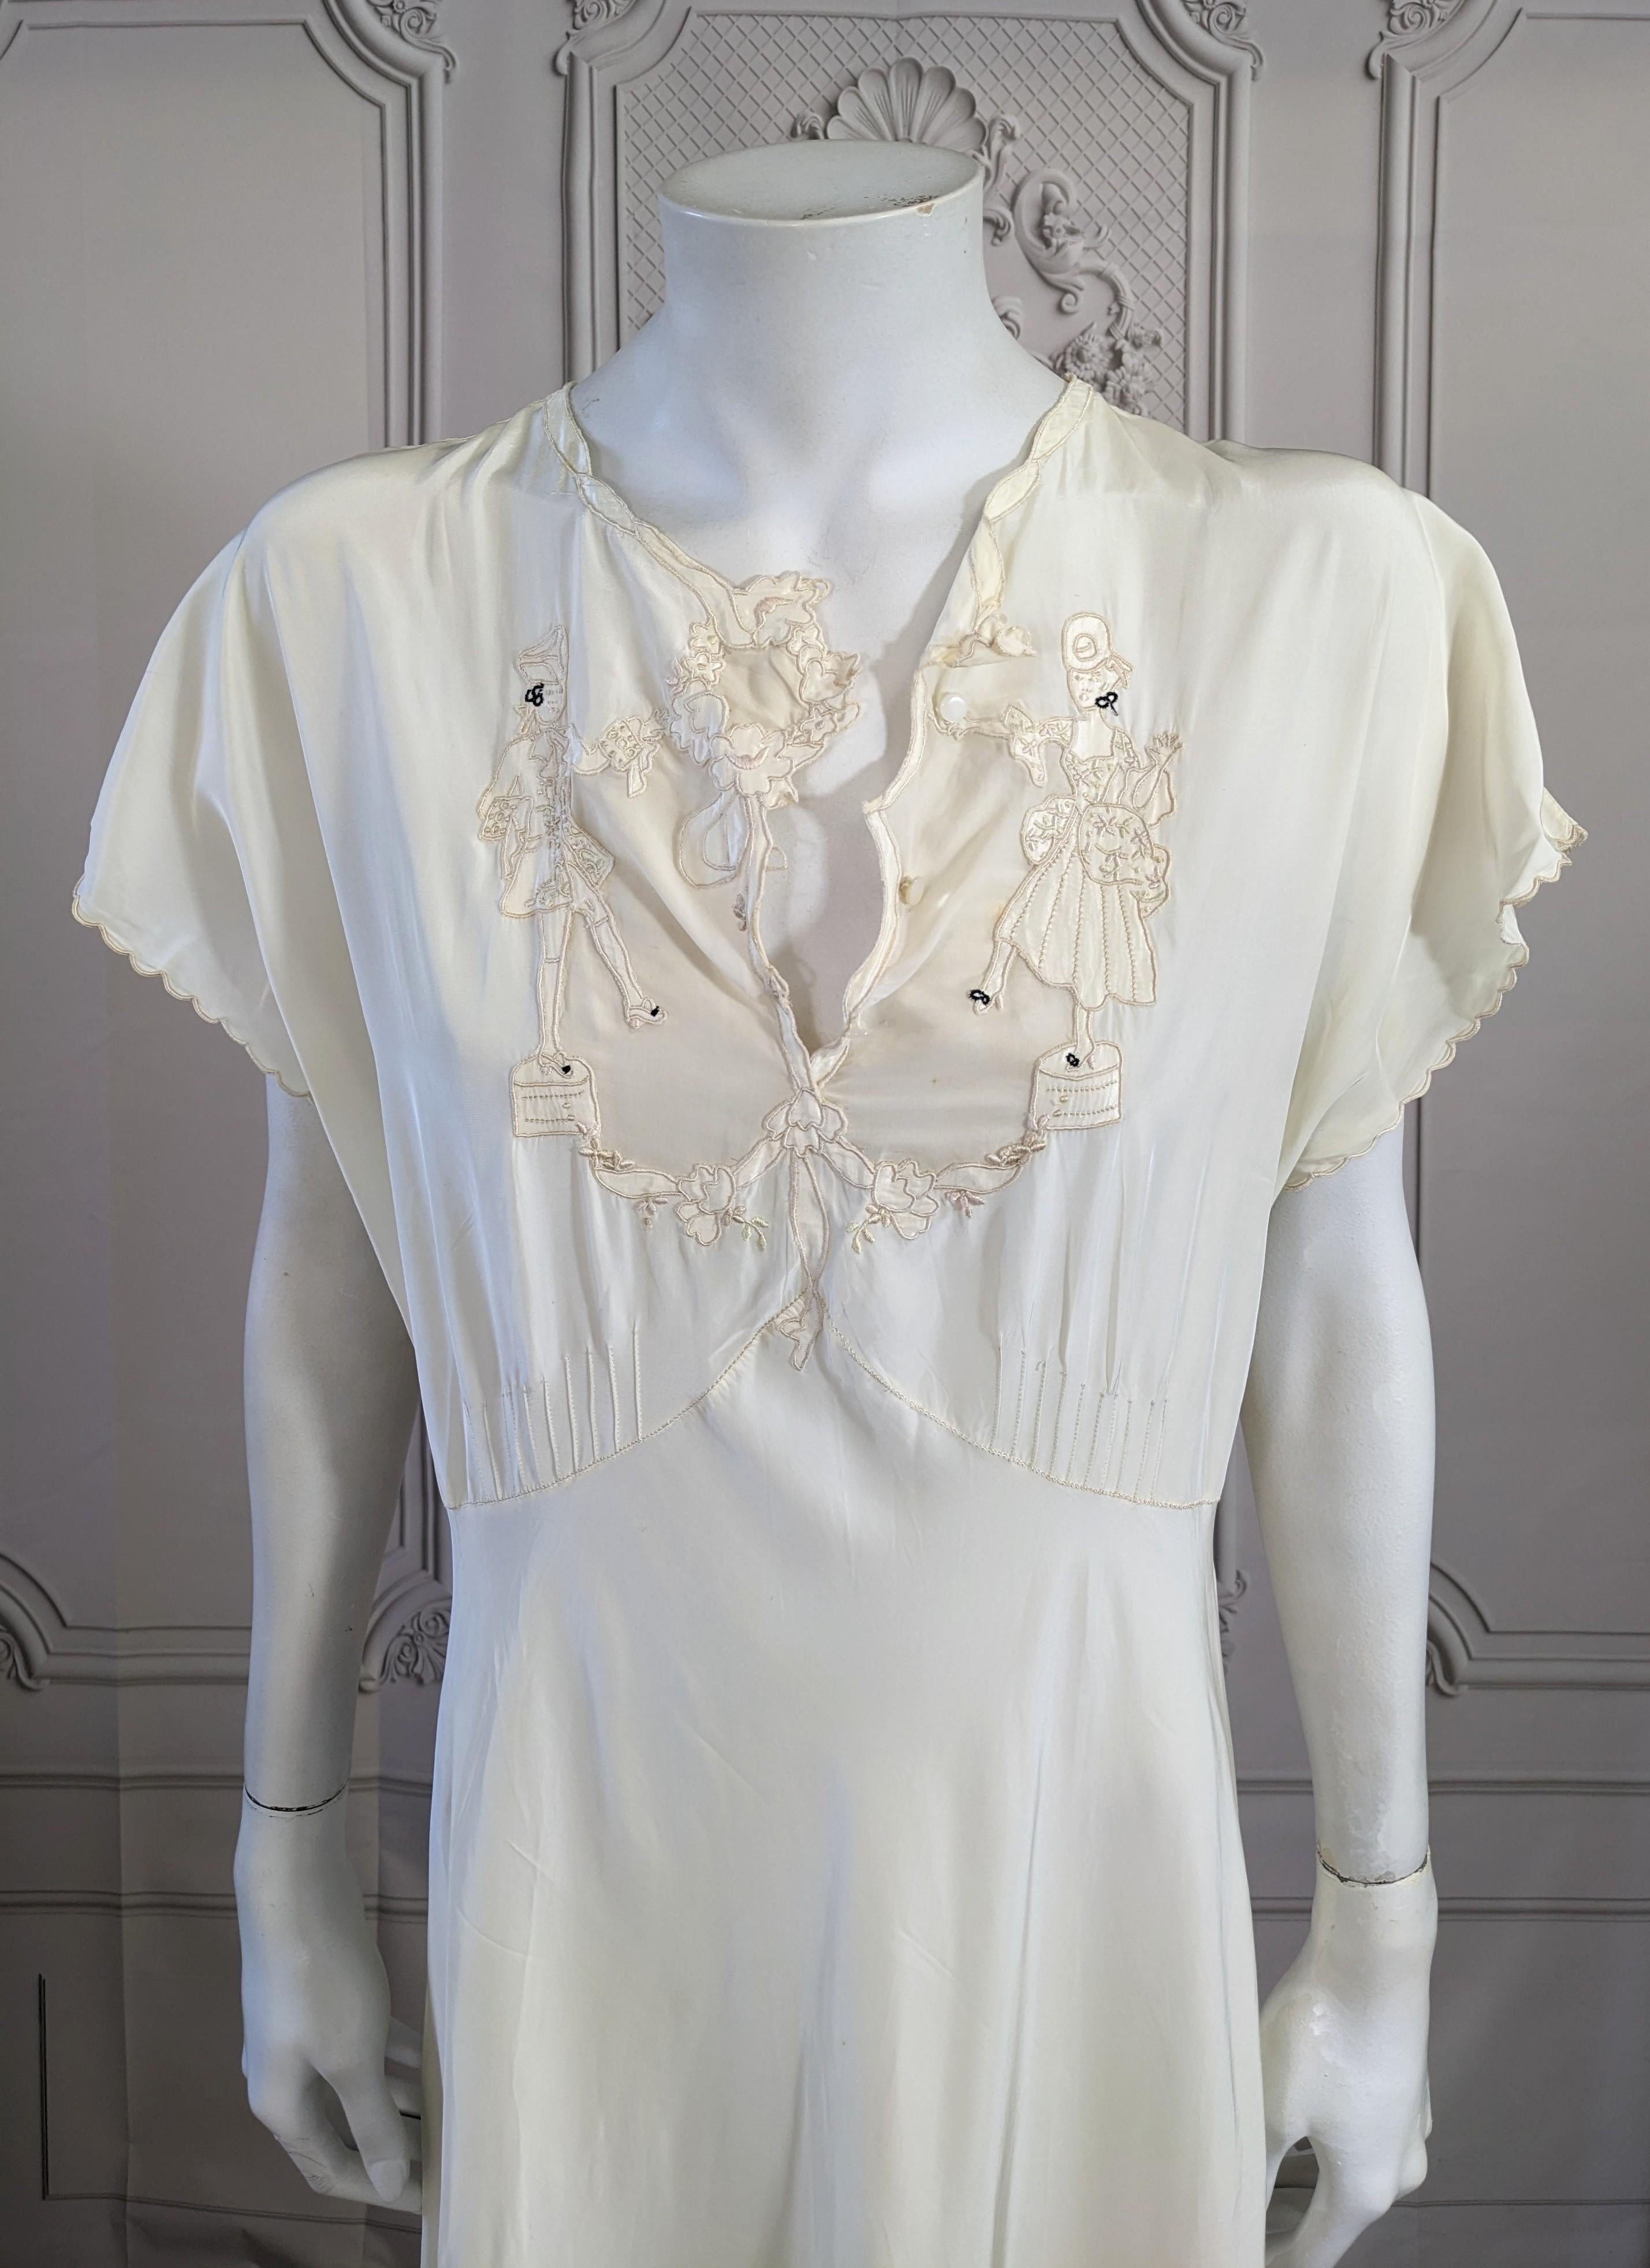 Charming Ivory Slip Dress, 18th Century Courtesan Embroideries For Sale 4